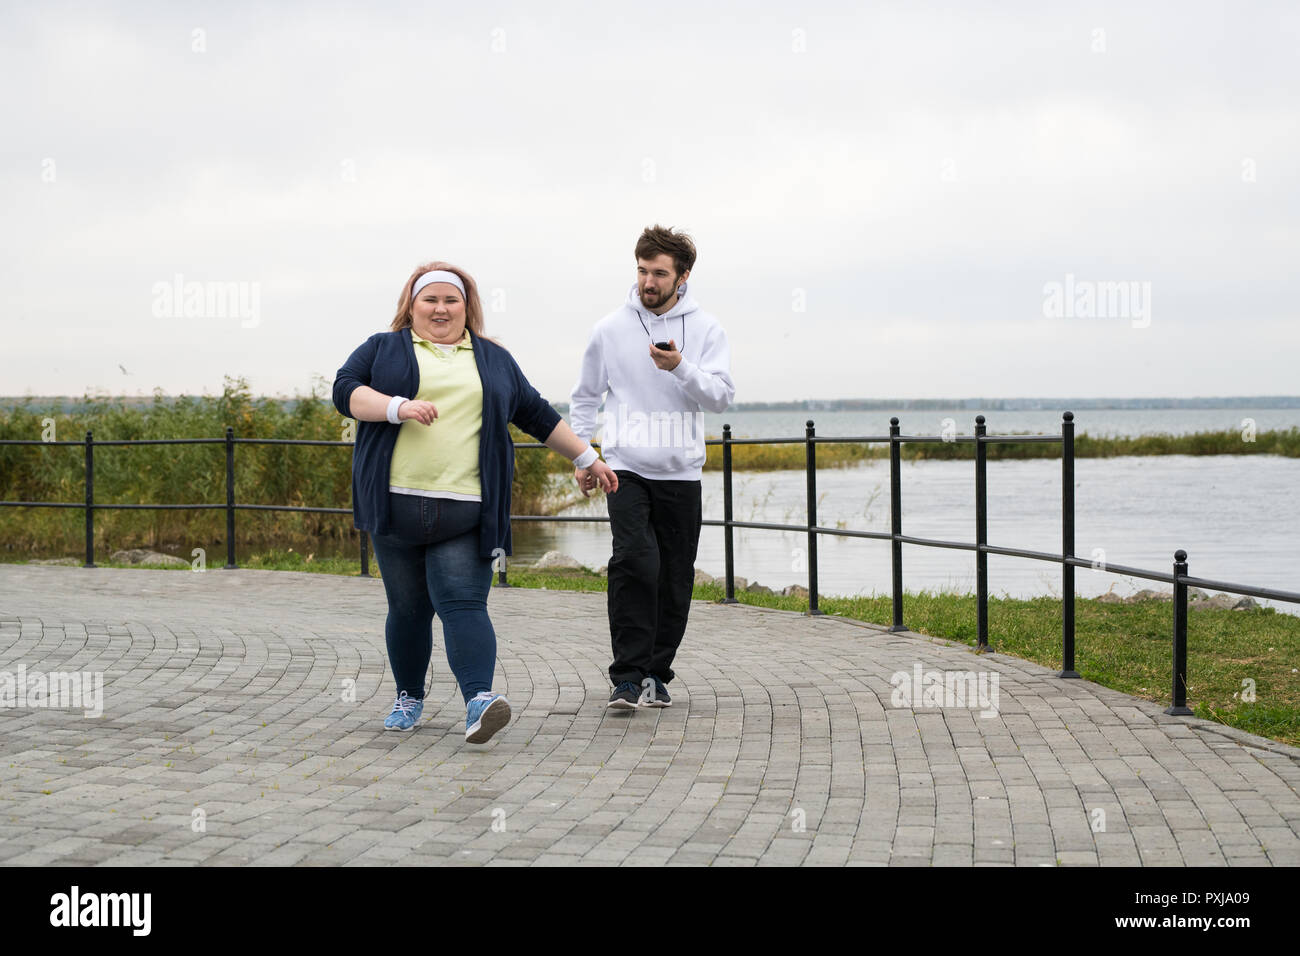 Obese Woman Jogging Outdoors Stock Photo